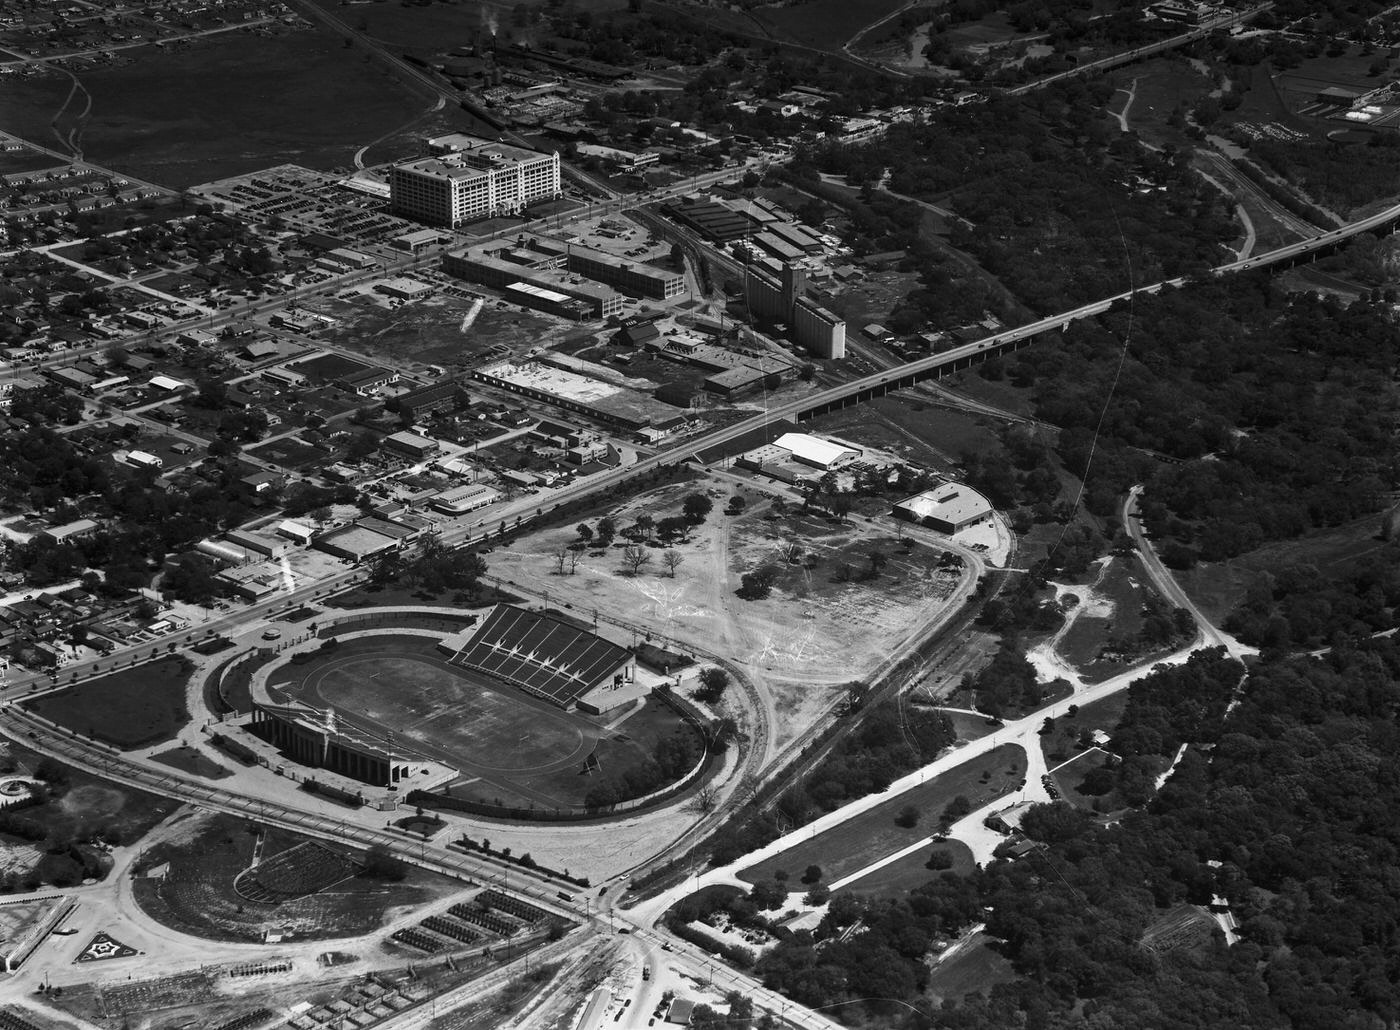 Aerial view of Farrington Field and the Casa Manana revolving stage, 1947